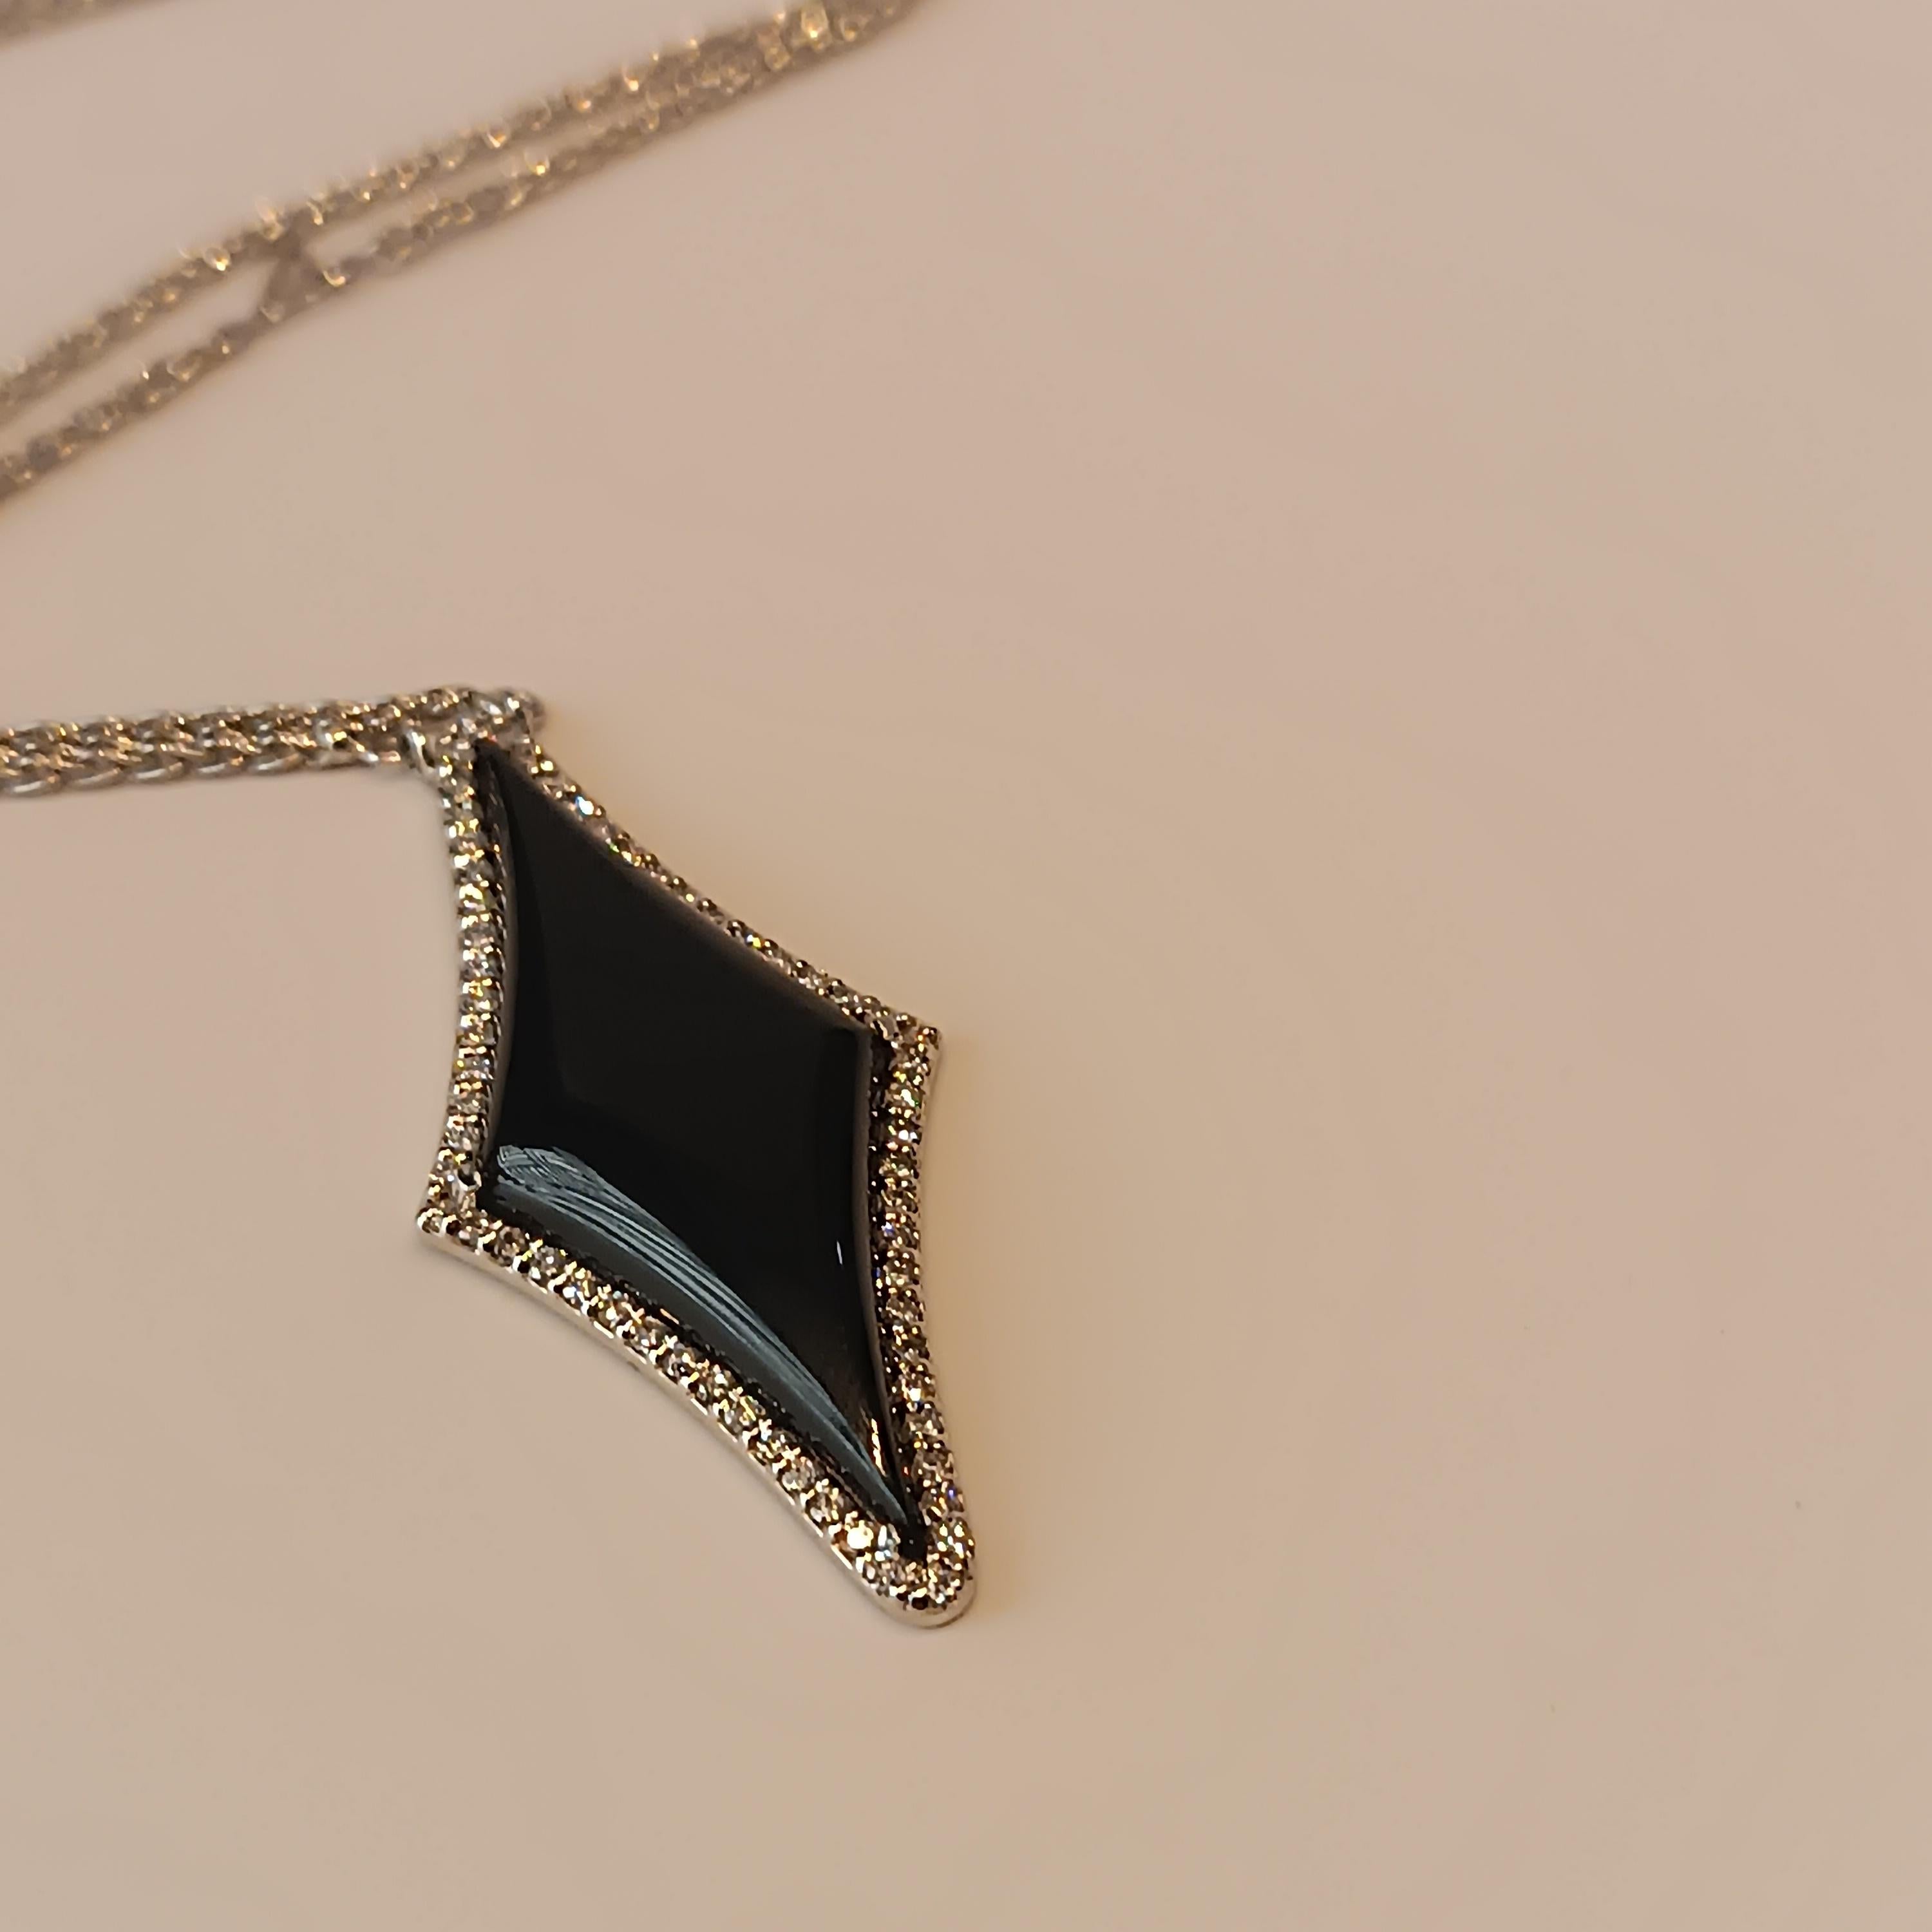 This wonderful Leo Milano pendant from our Brera  collection shows in every detail a very complicate yet perfectly done workmanship. The pendant and the chain are in 18 carat white gold with onyx . The object weights 9.63 grams the total diamonds 